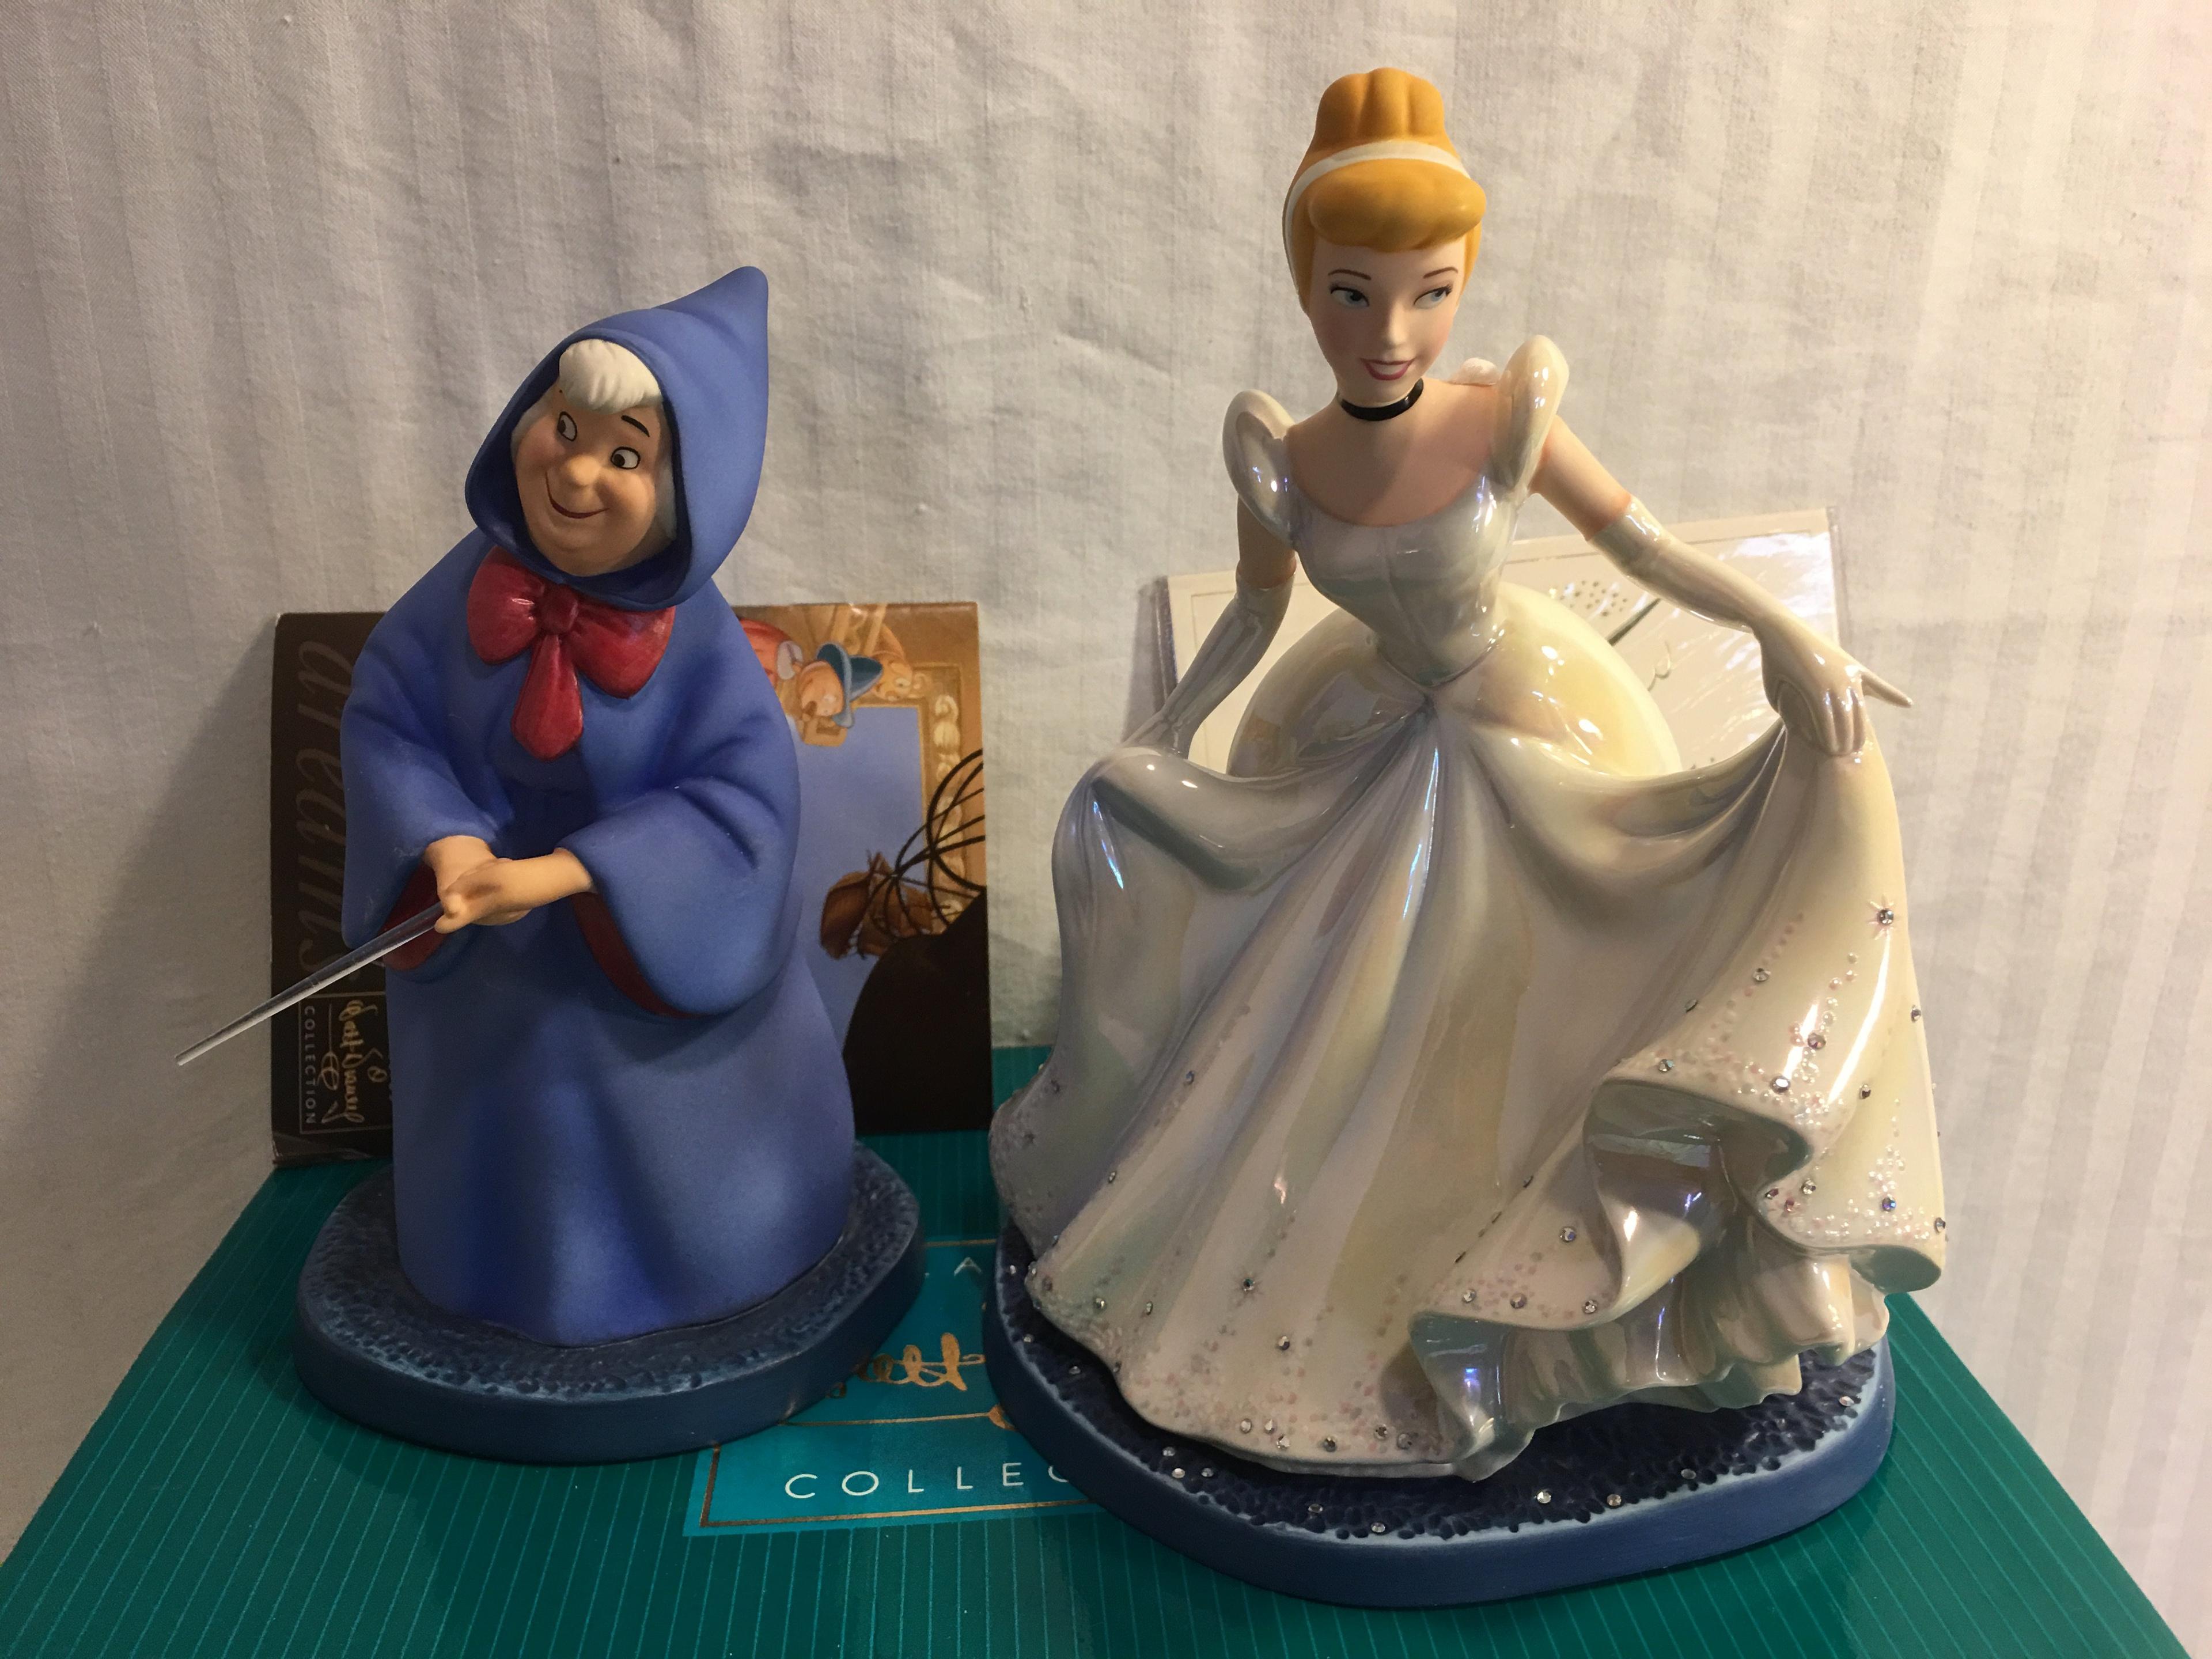 Collector Classic Walt Disney Collection Cinderella Fairy Godmother #1231051 Box Size:8x11.5"